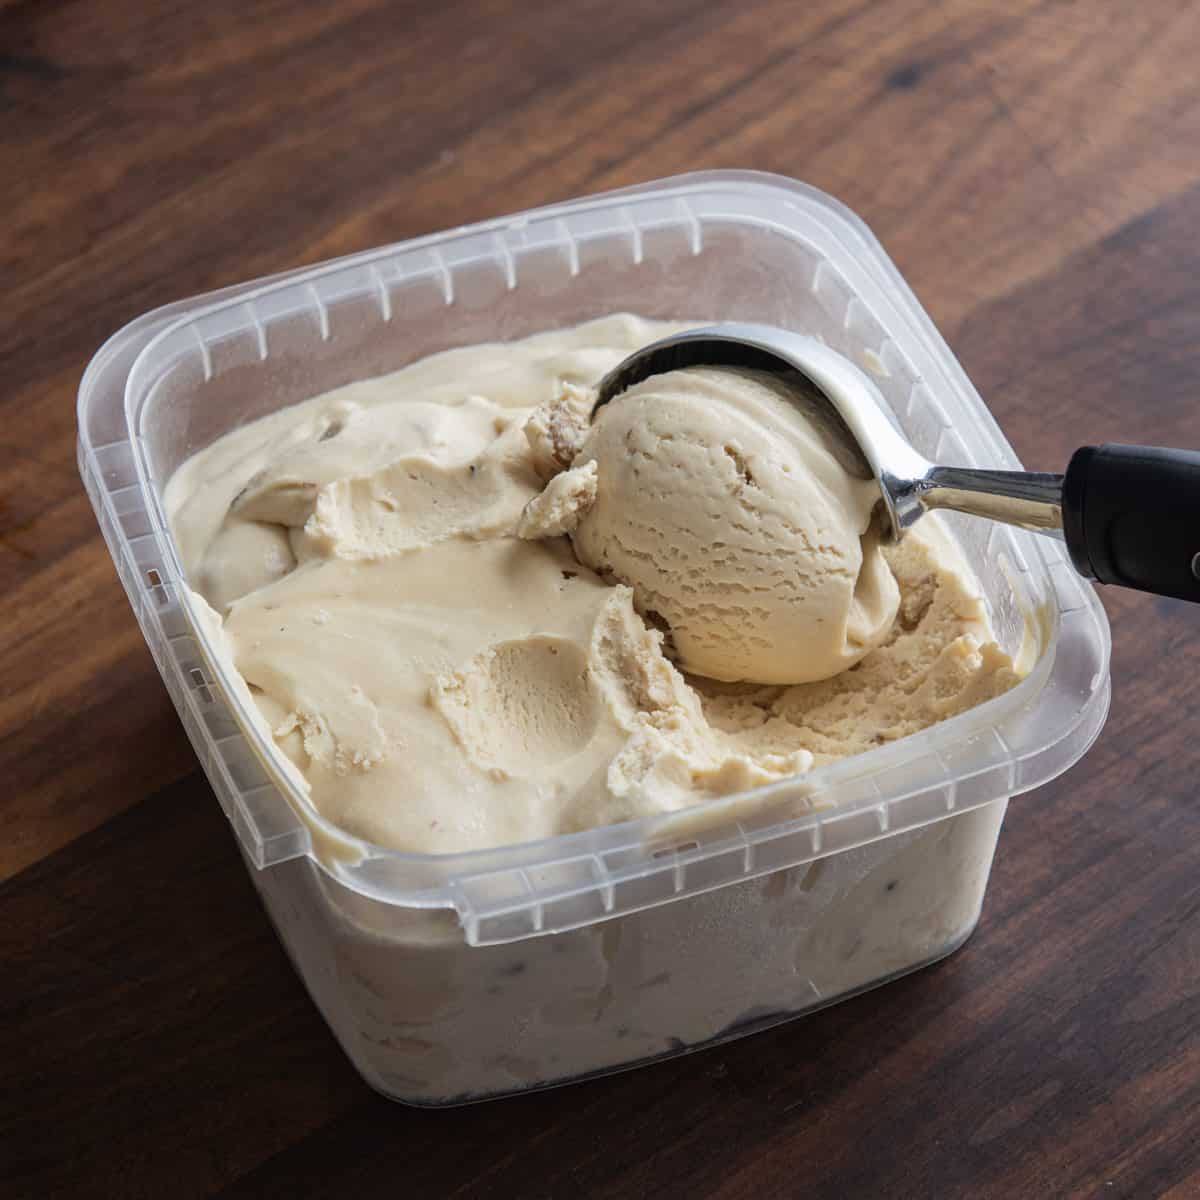 Scooping black walnut ice cream from a deli container.